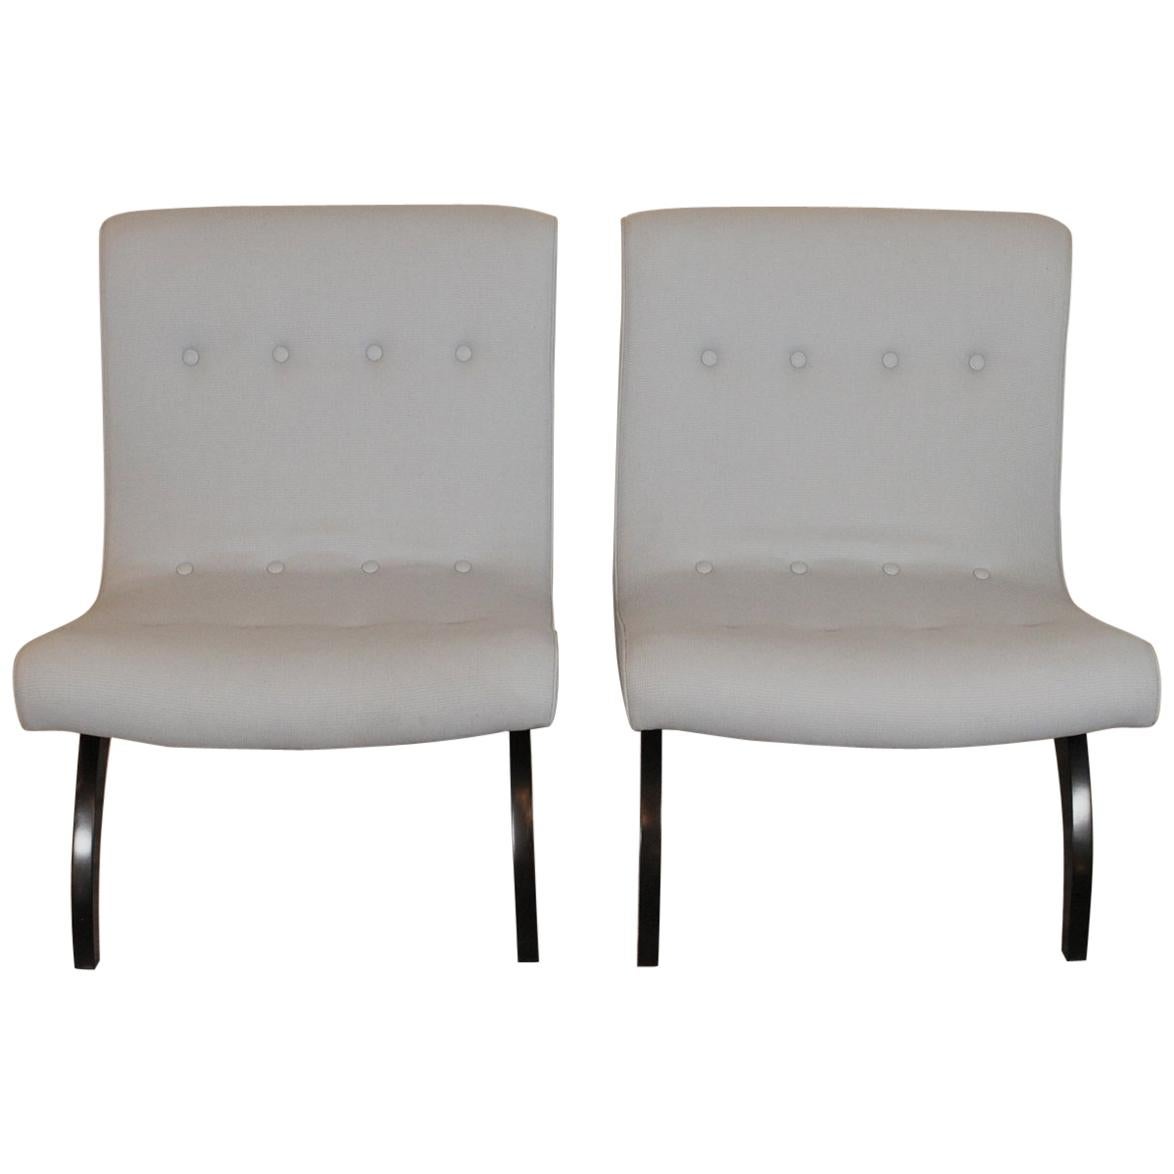 Pair of Scoop Chairs by Milo Baughman for Thayer Coggin